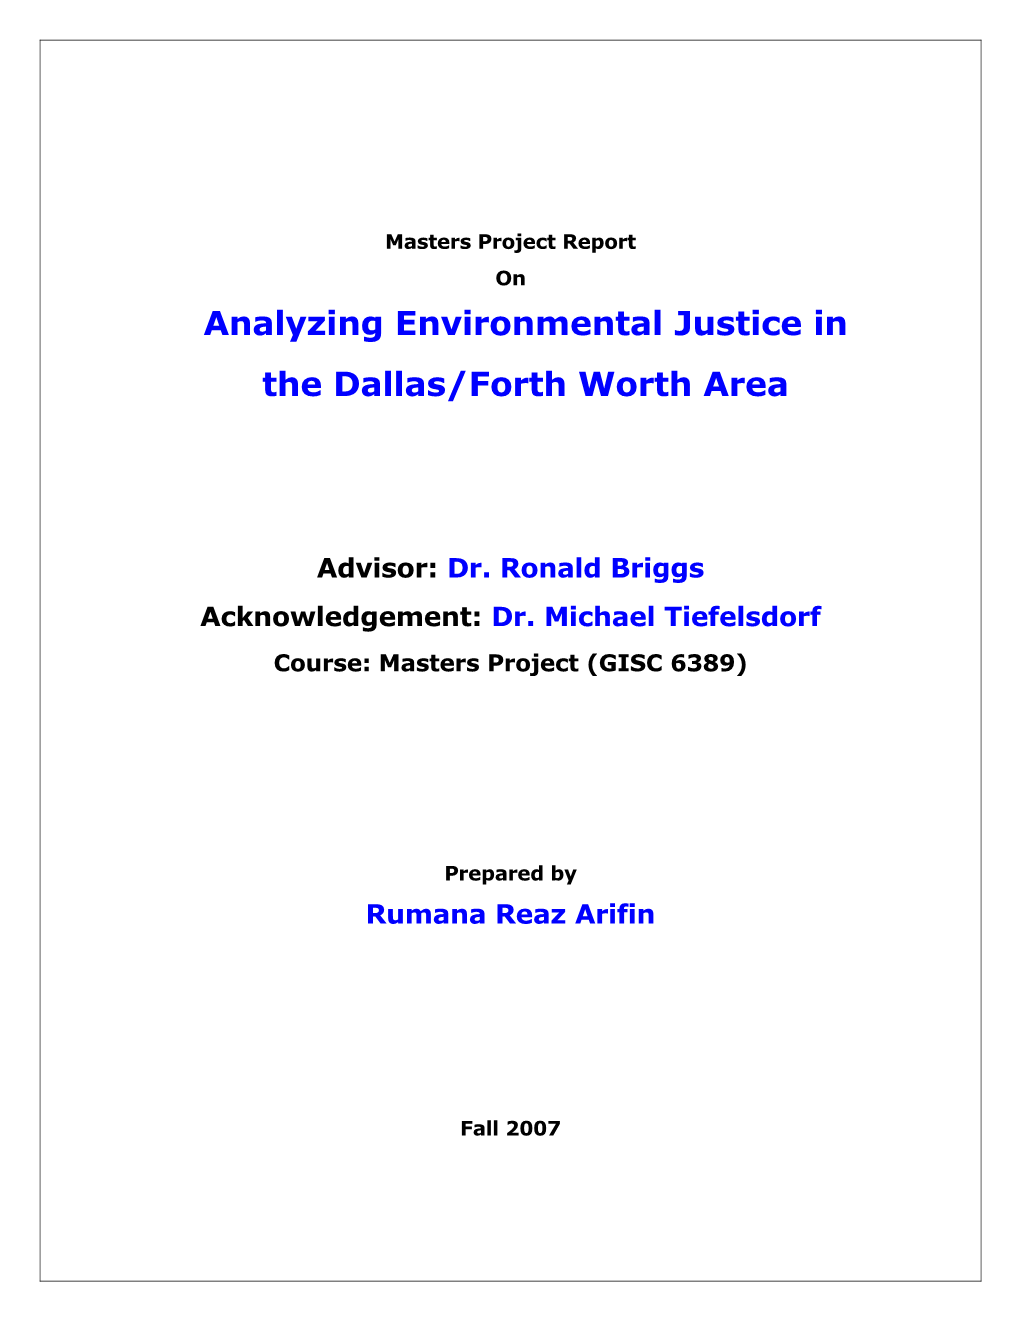 Analyzing Environmental Justice in the Dallas/Forth Worth Area